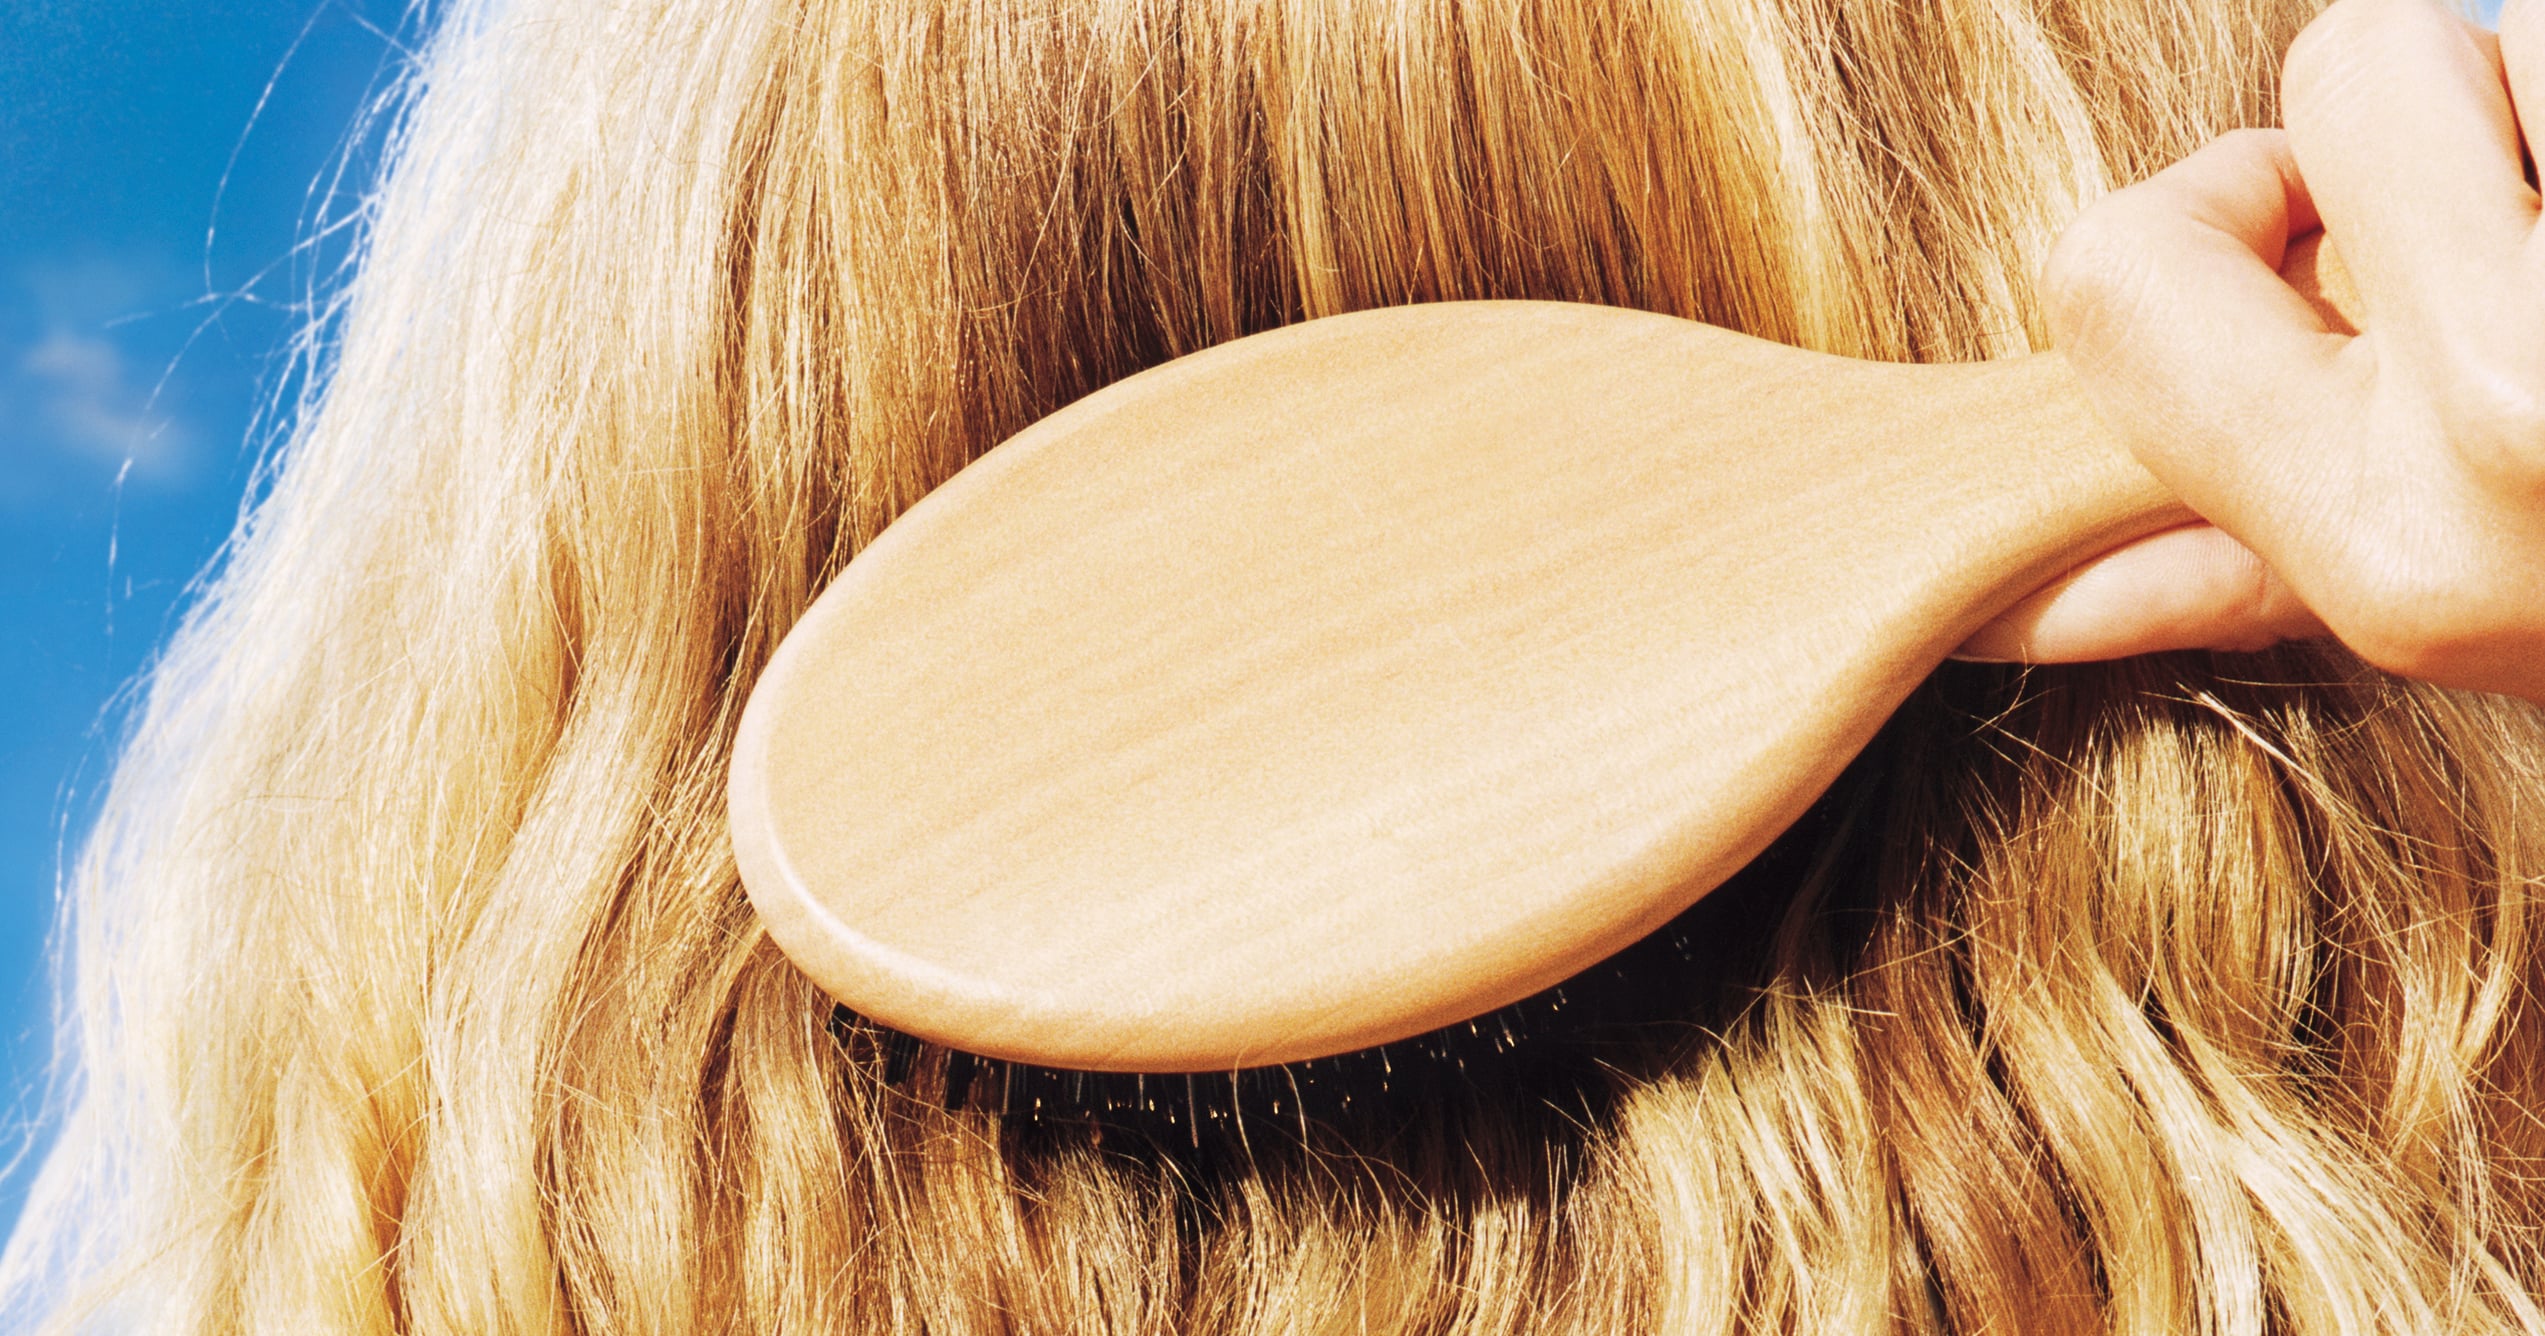 15 Hair Brushes For All Hair Types and Textures